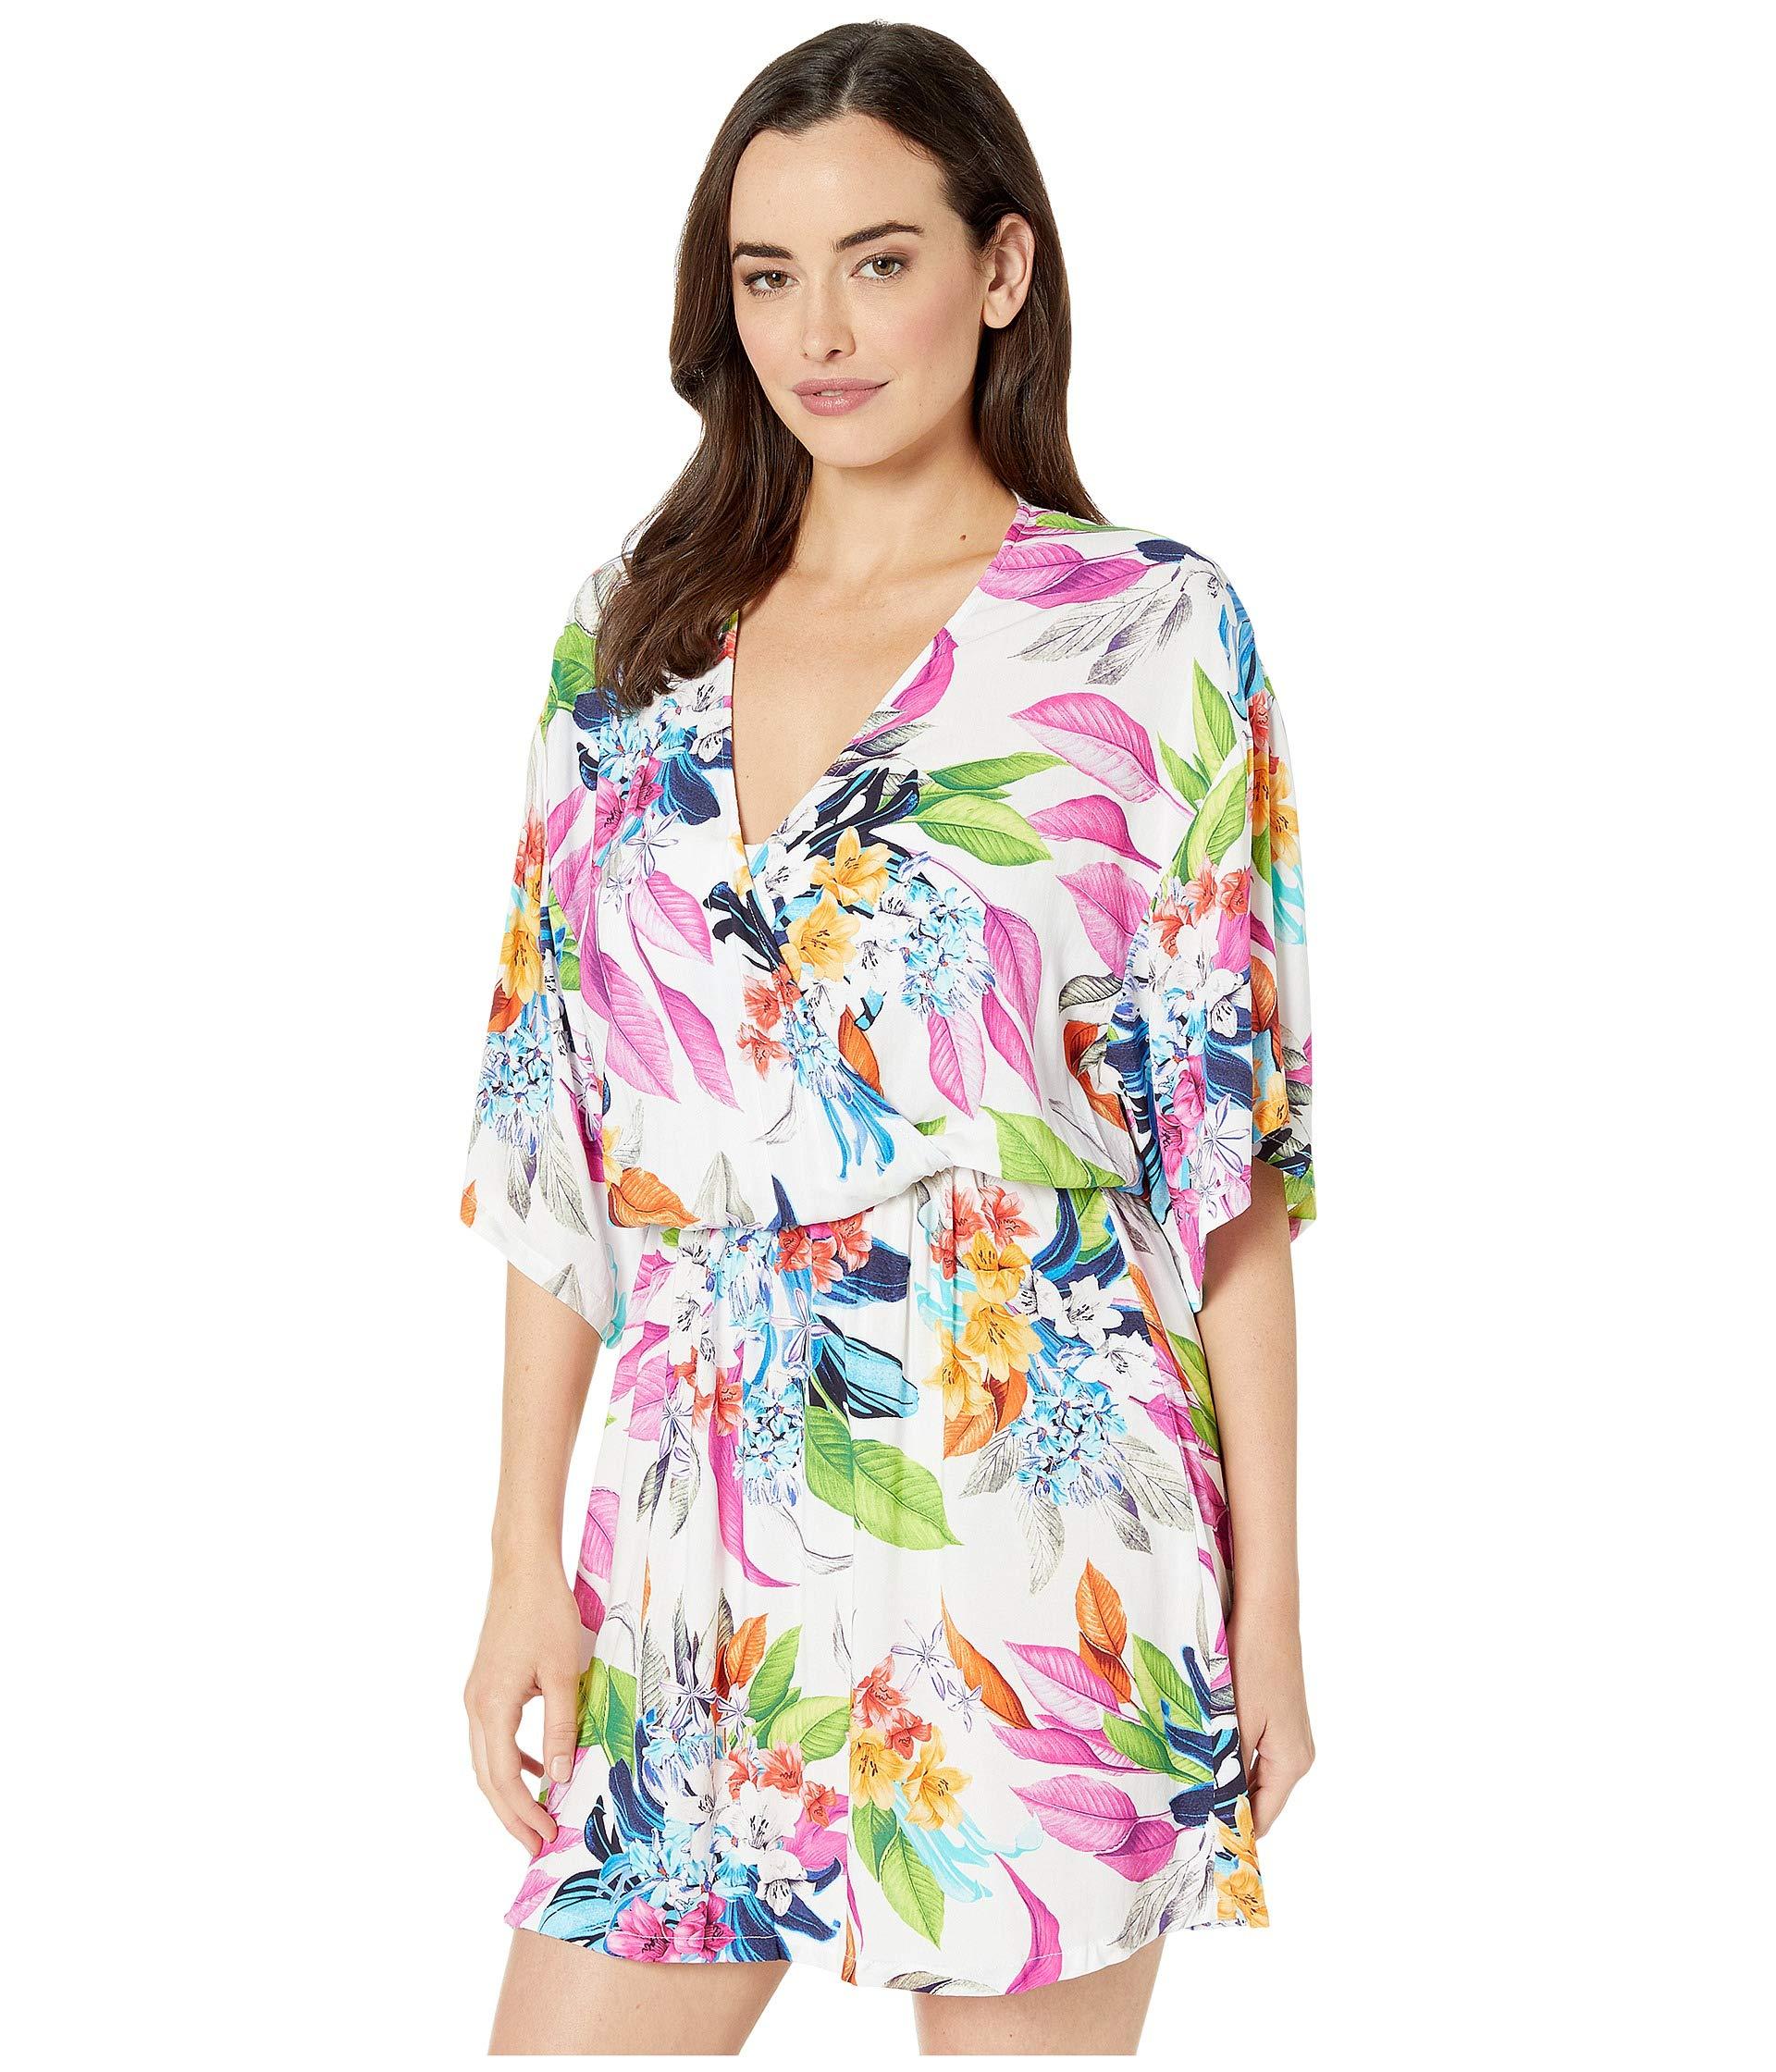 La Blanca Synthetic Hyper Tropical Printed Cover-up in White - Lyst